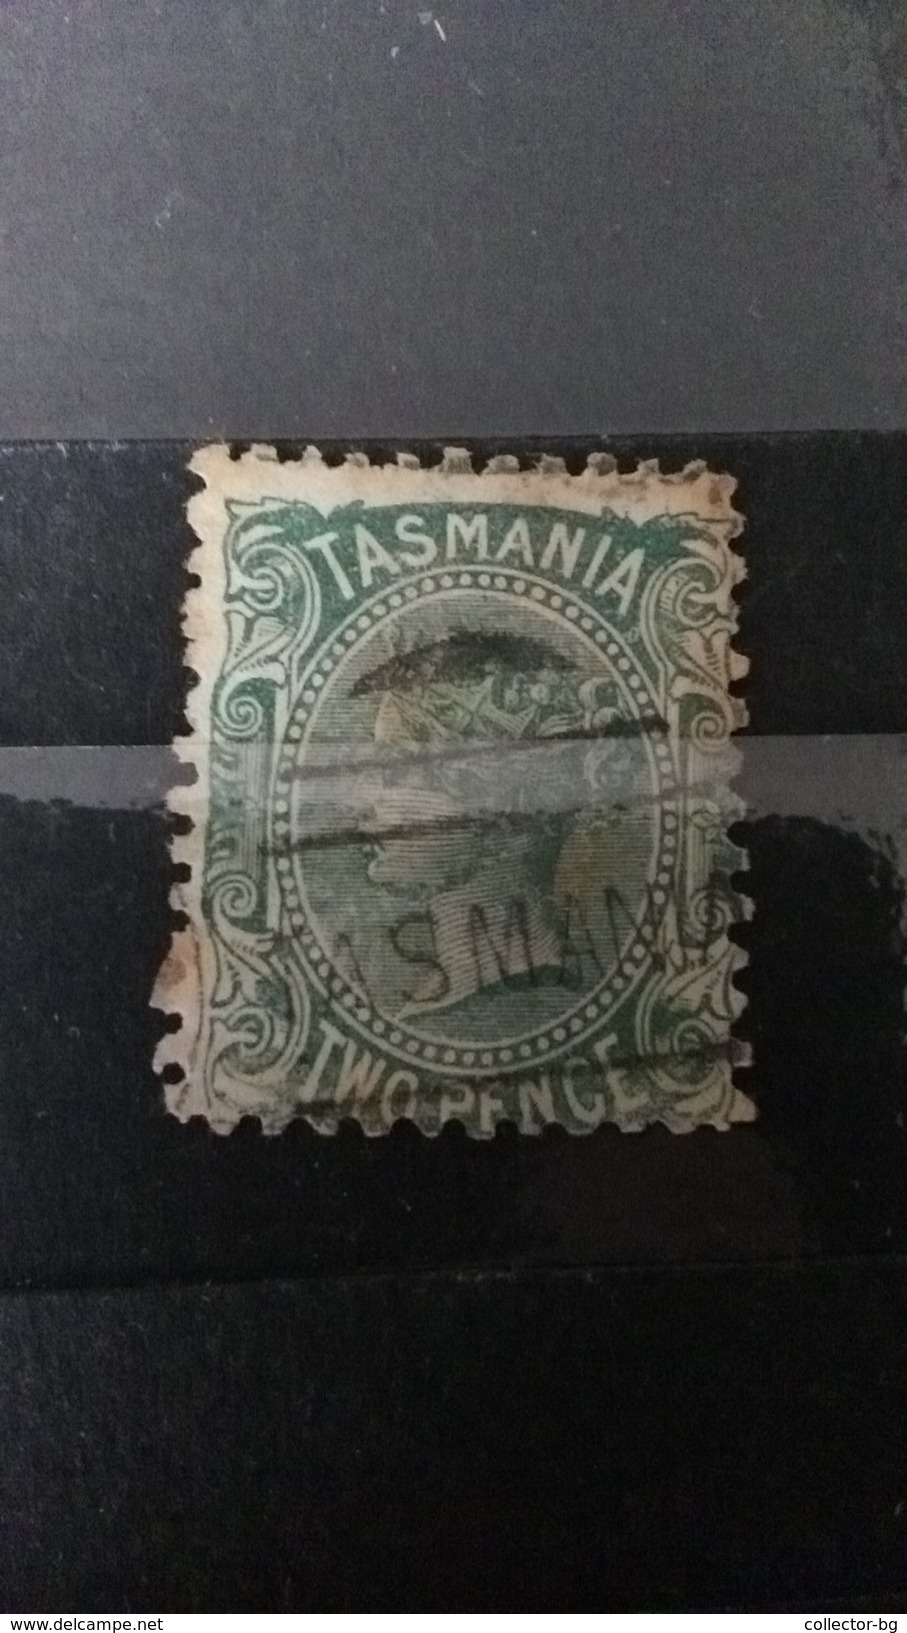 RARE 1870-1900 TWO PENCE QUEEN VICTORIA GREEN WATERMARK SEAL "TASMANIA"  USED  STAMP TIMBRE - Gebraucht